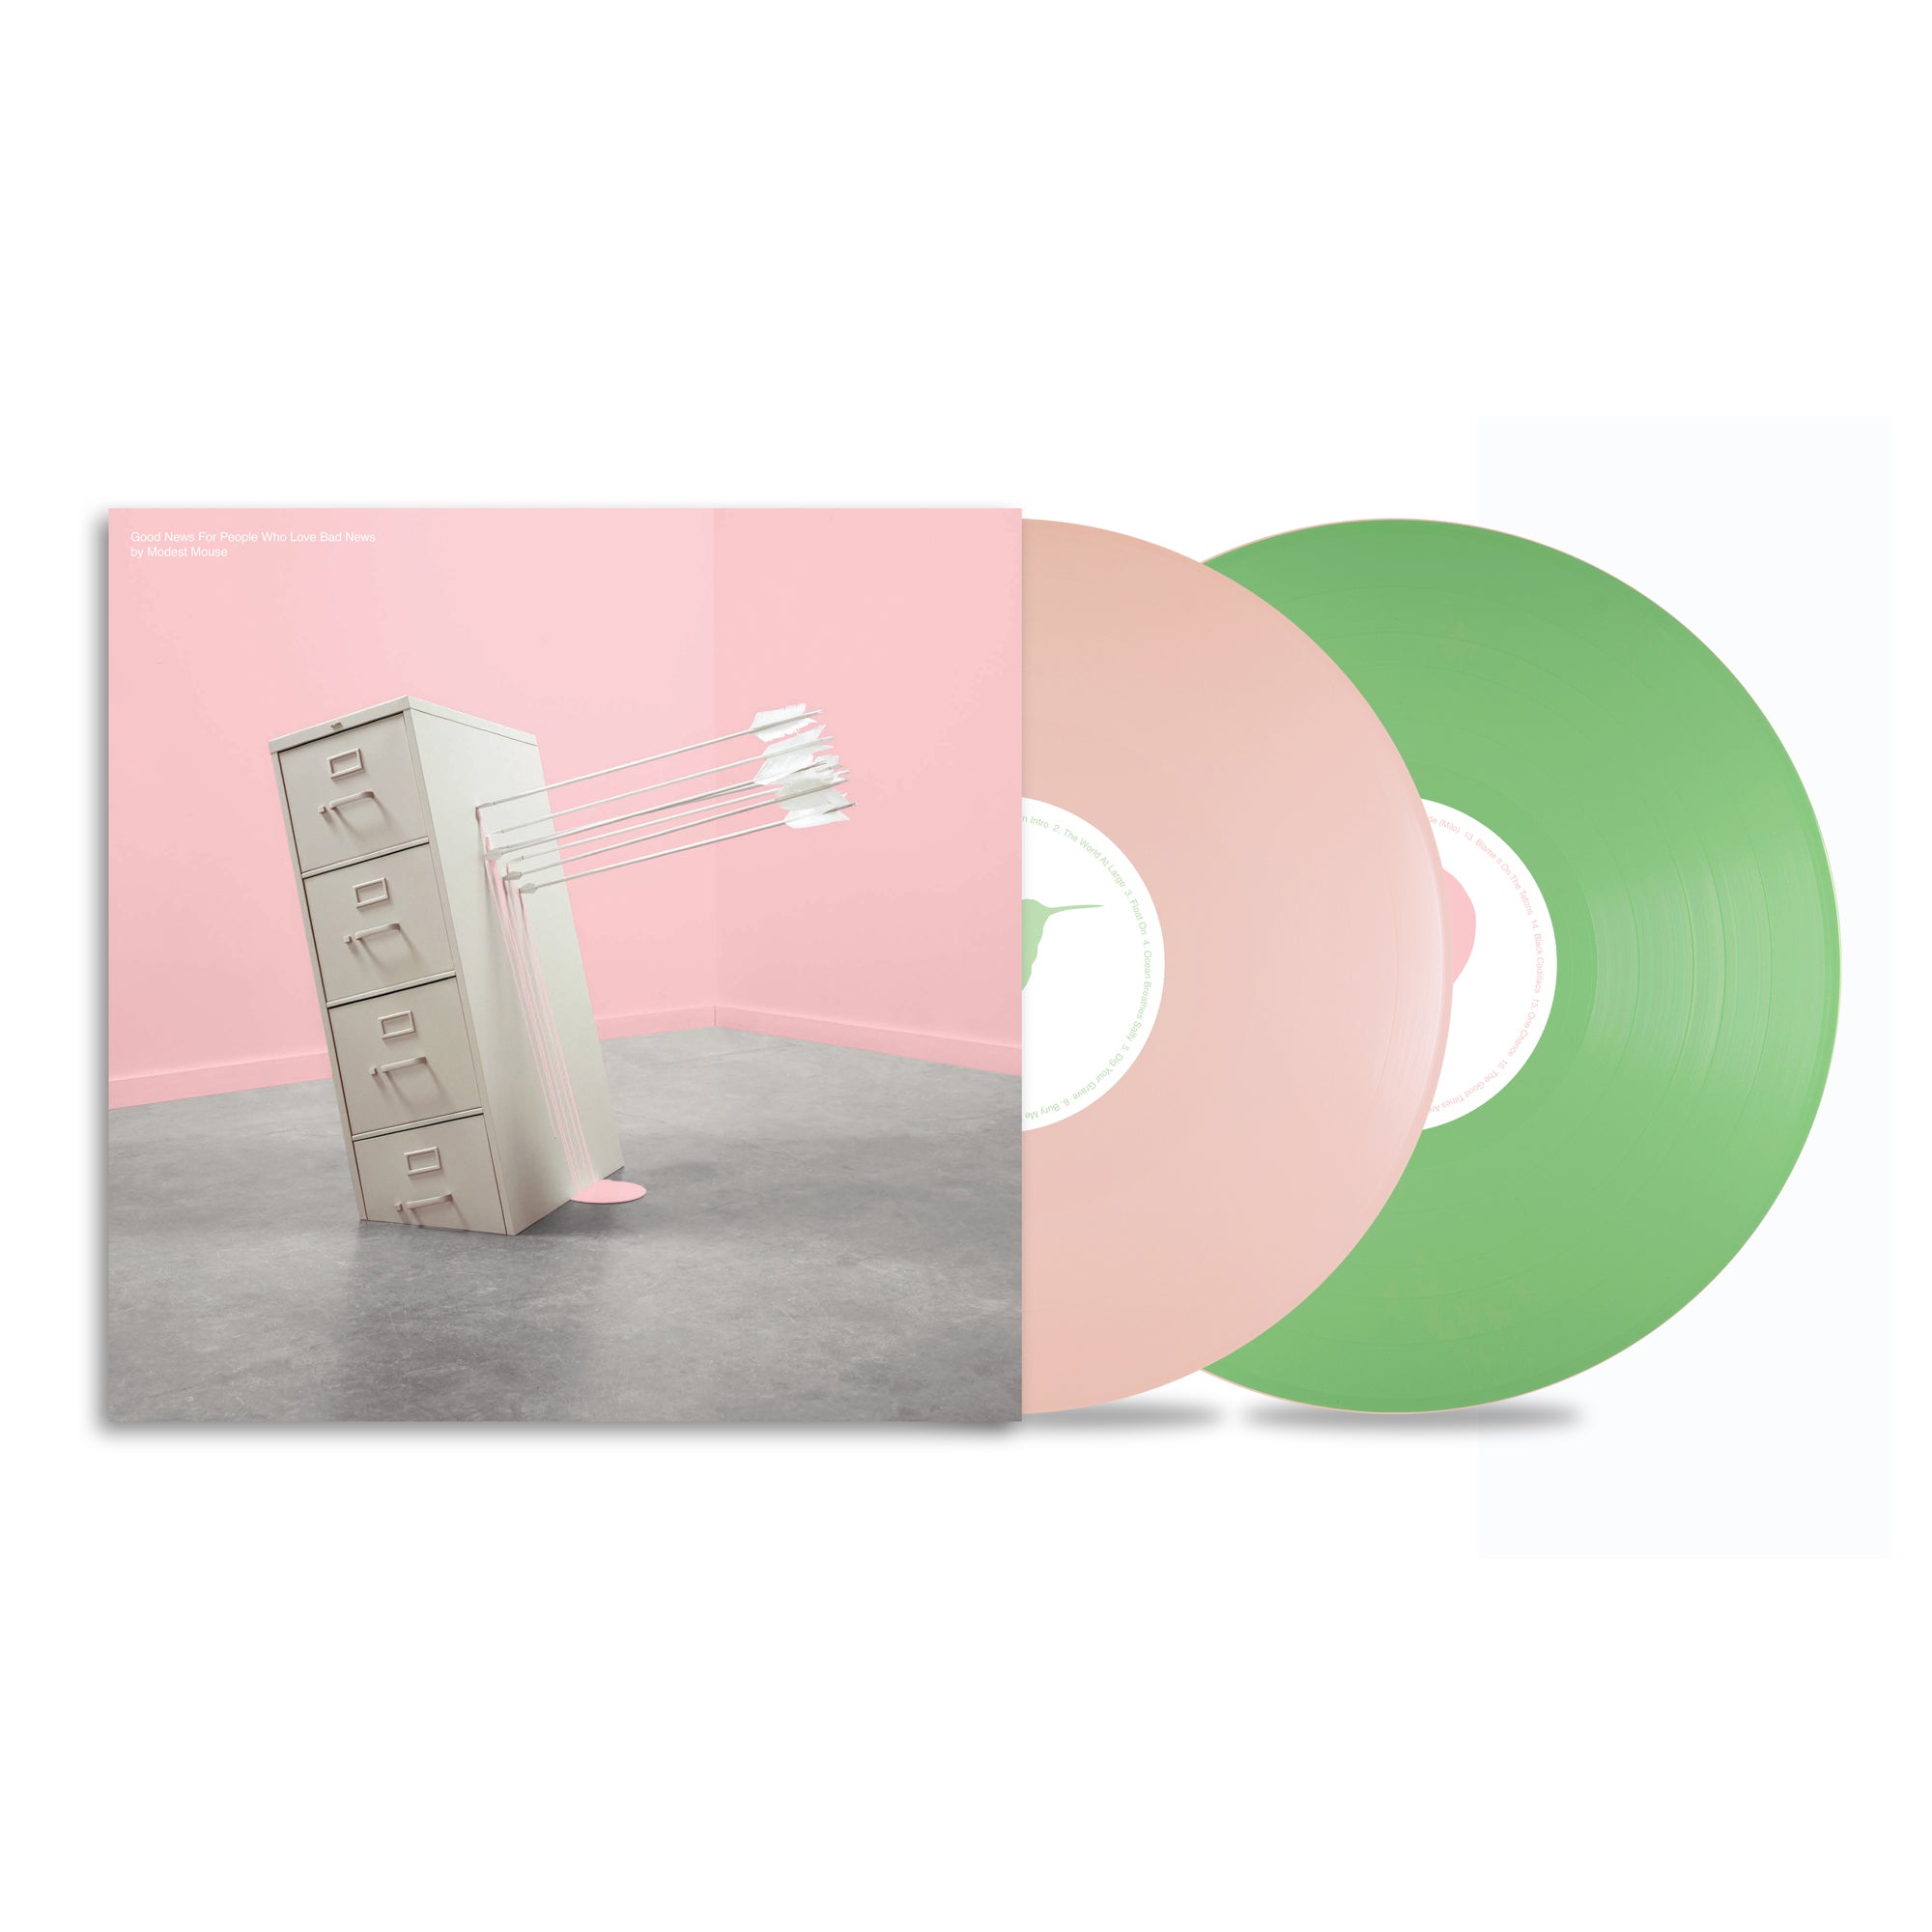 Modest Mouse - Good News For People Who Love Bad News (20th Anniversary): Deluxe Baby Pink & Spring Green Vinyl 2LP